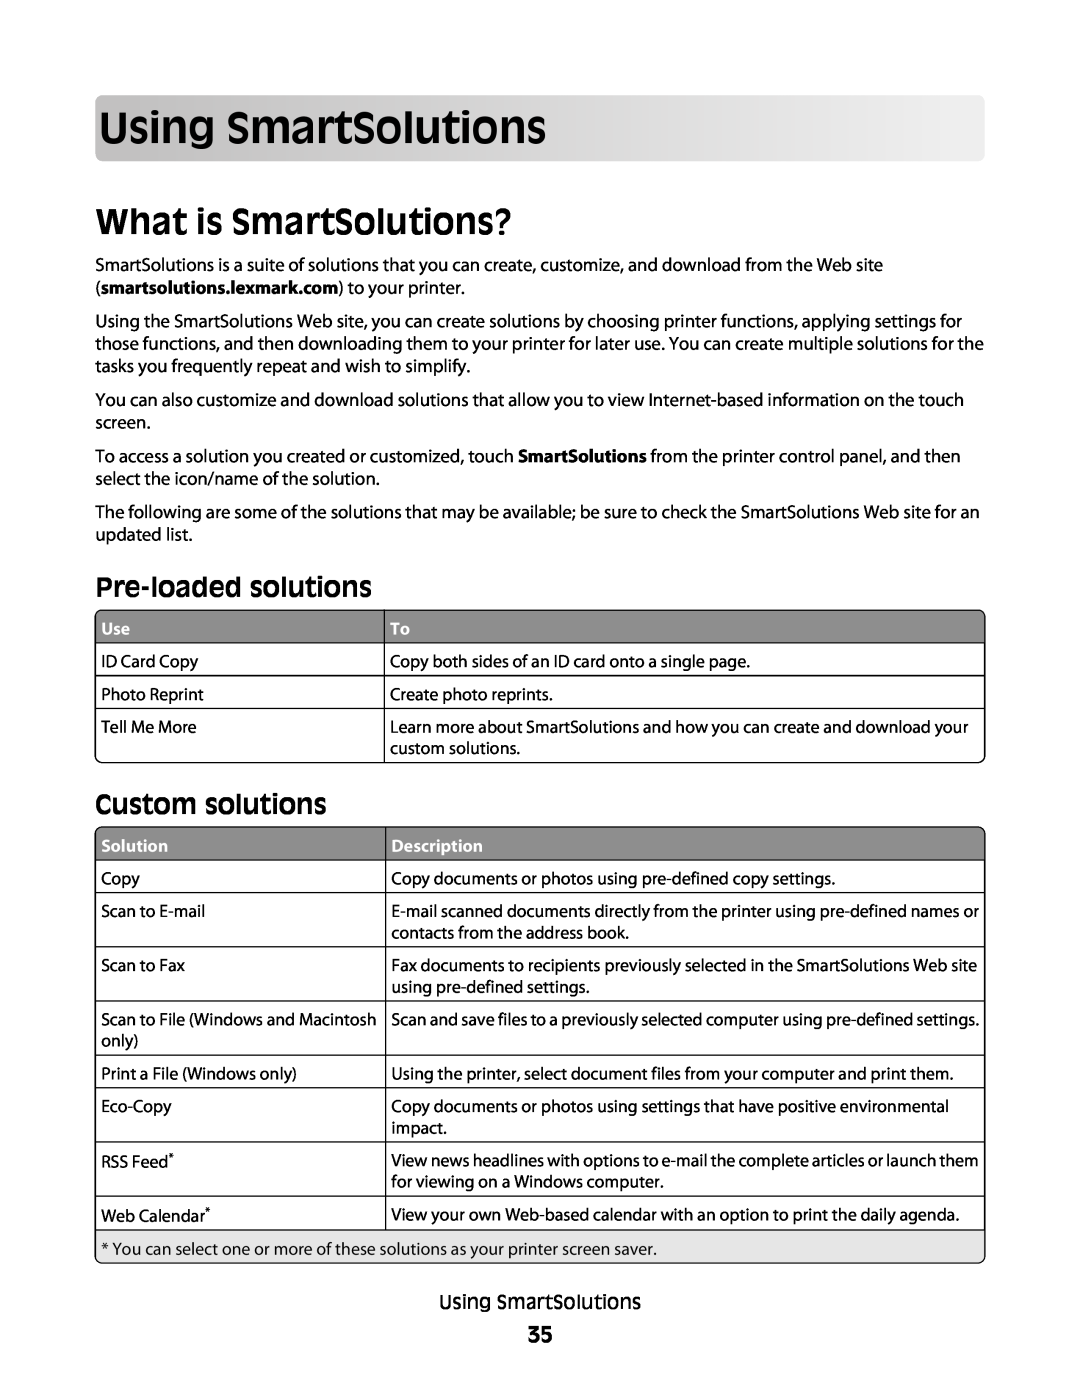 Lexmark S600 manual UsingSmartSolutions, What is SmartSolutions?, Pre-loaded solutions, Custom solutions 